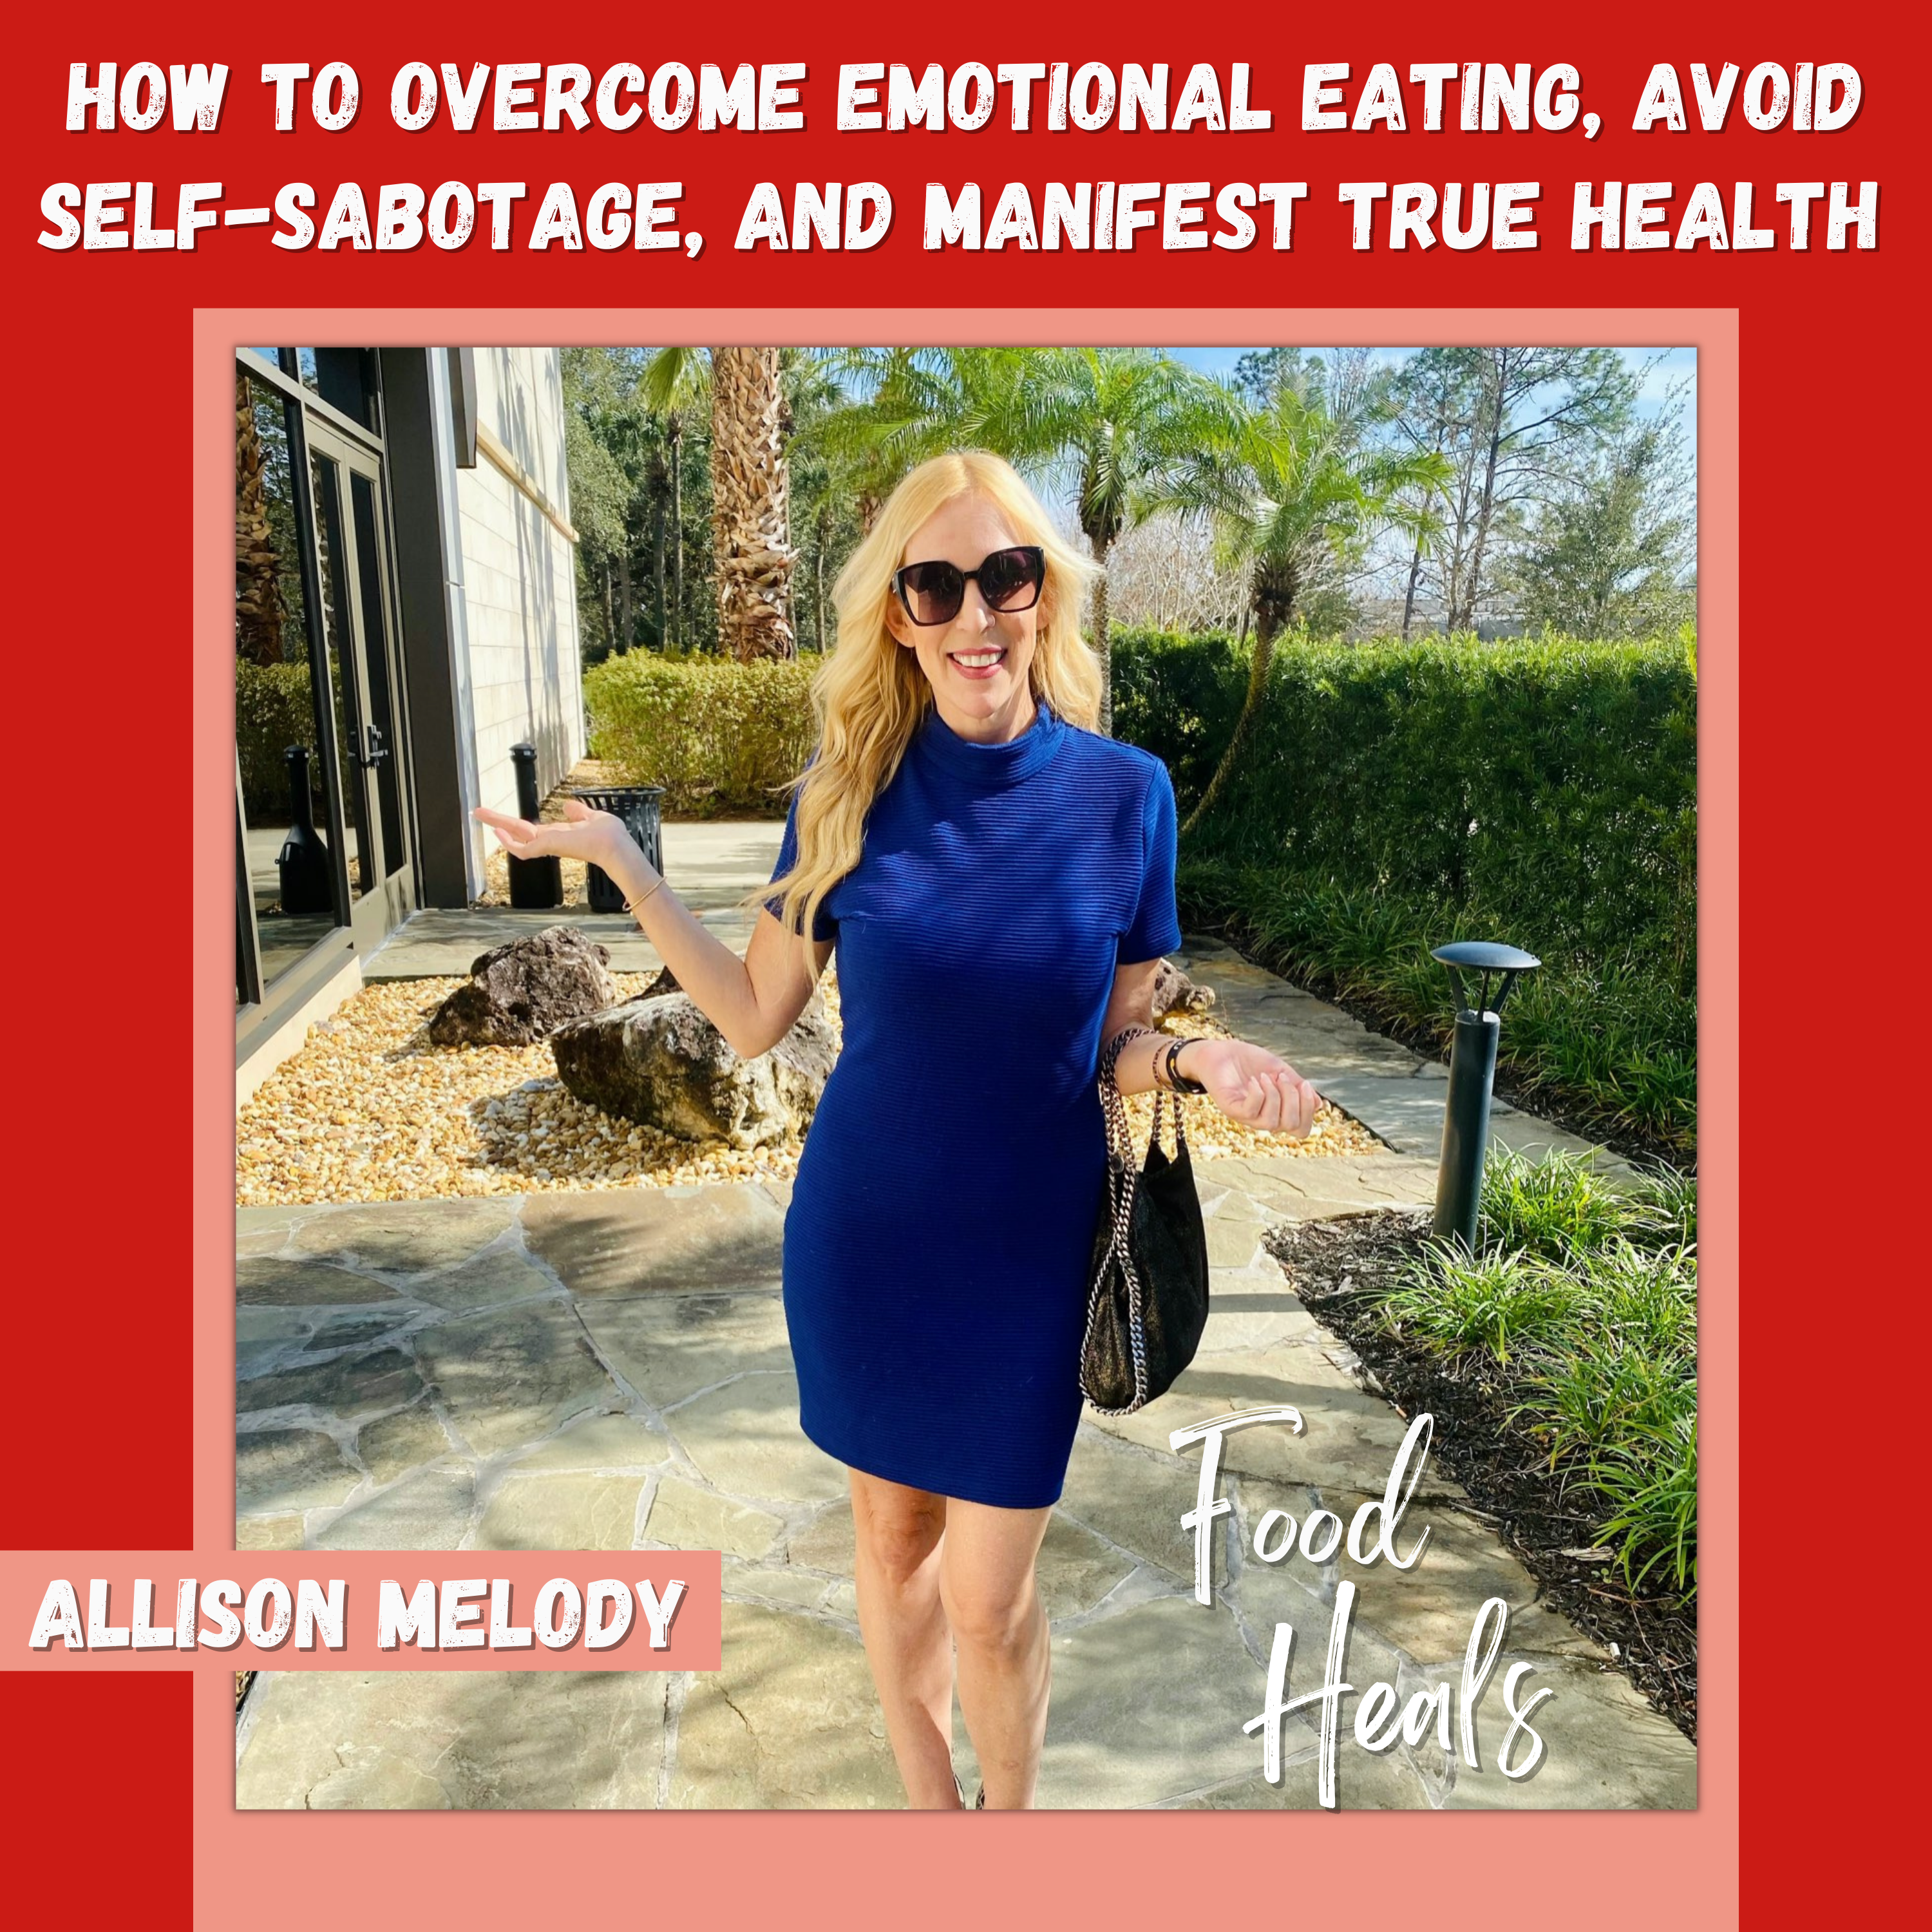 How to Overcome Emotional Eating with a Food and Mood Journal, Avoid Self-Sabotage by Cultivating Self-Love, and Manifest True Health by Setting Healthy Boundaries (Healthy AF: Part 1)